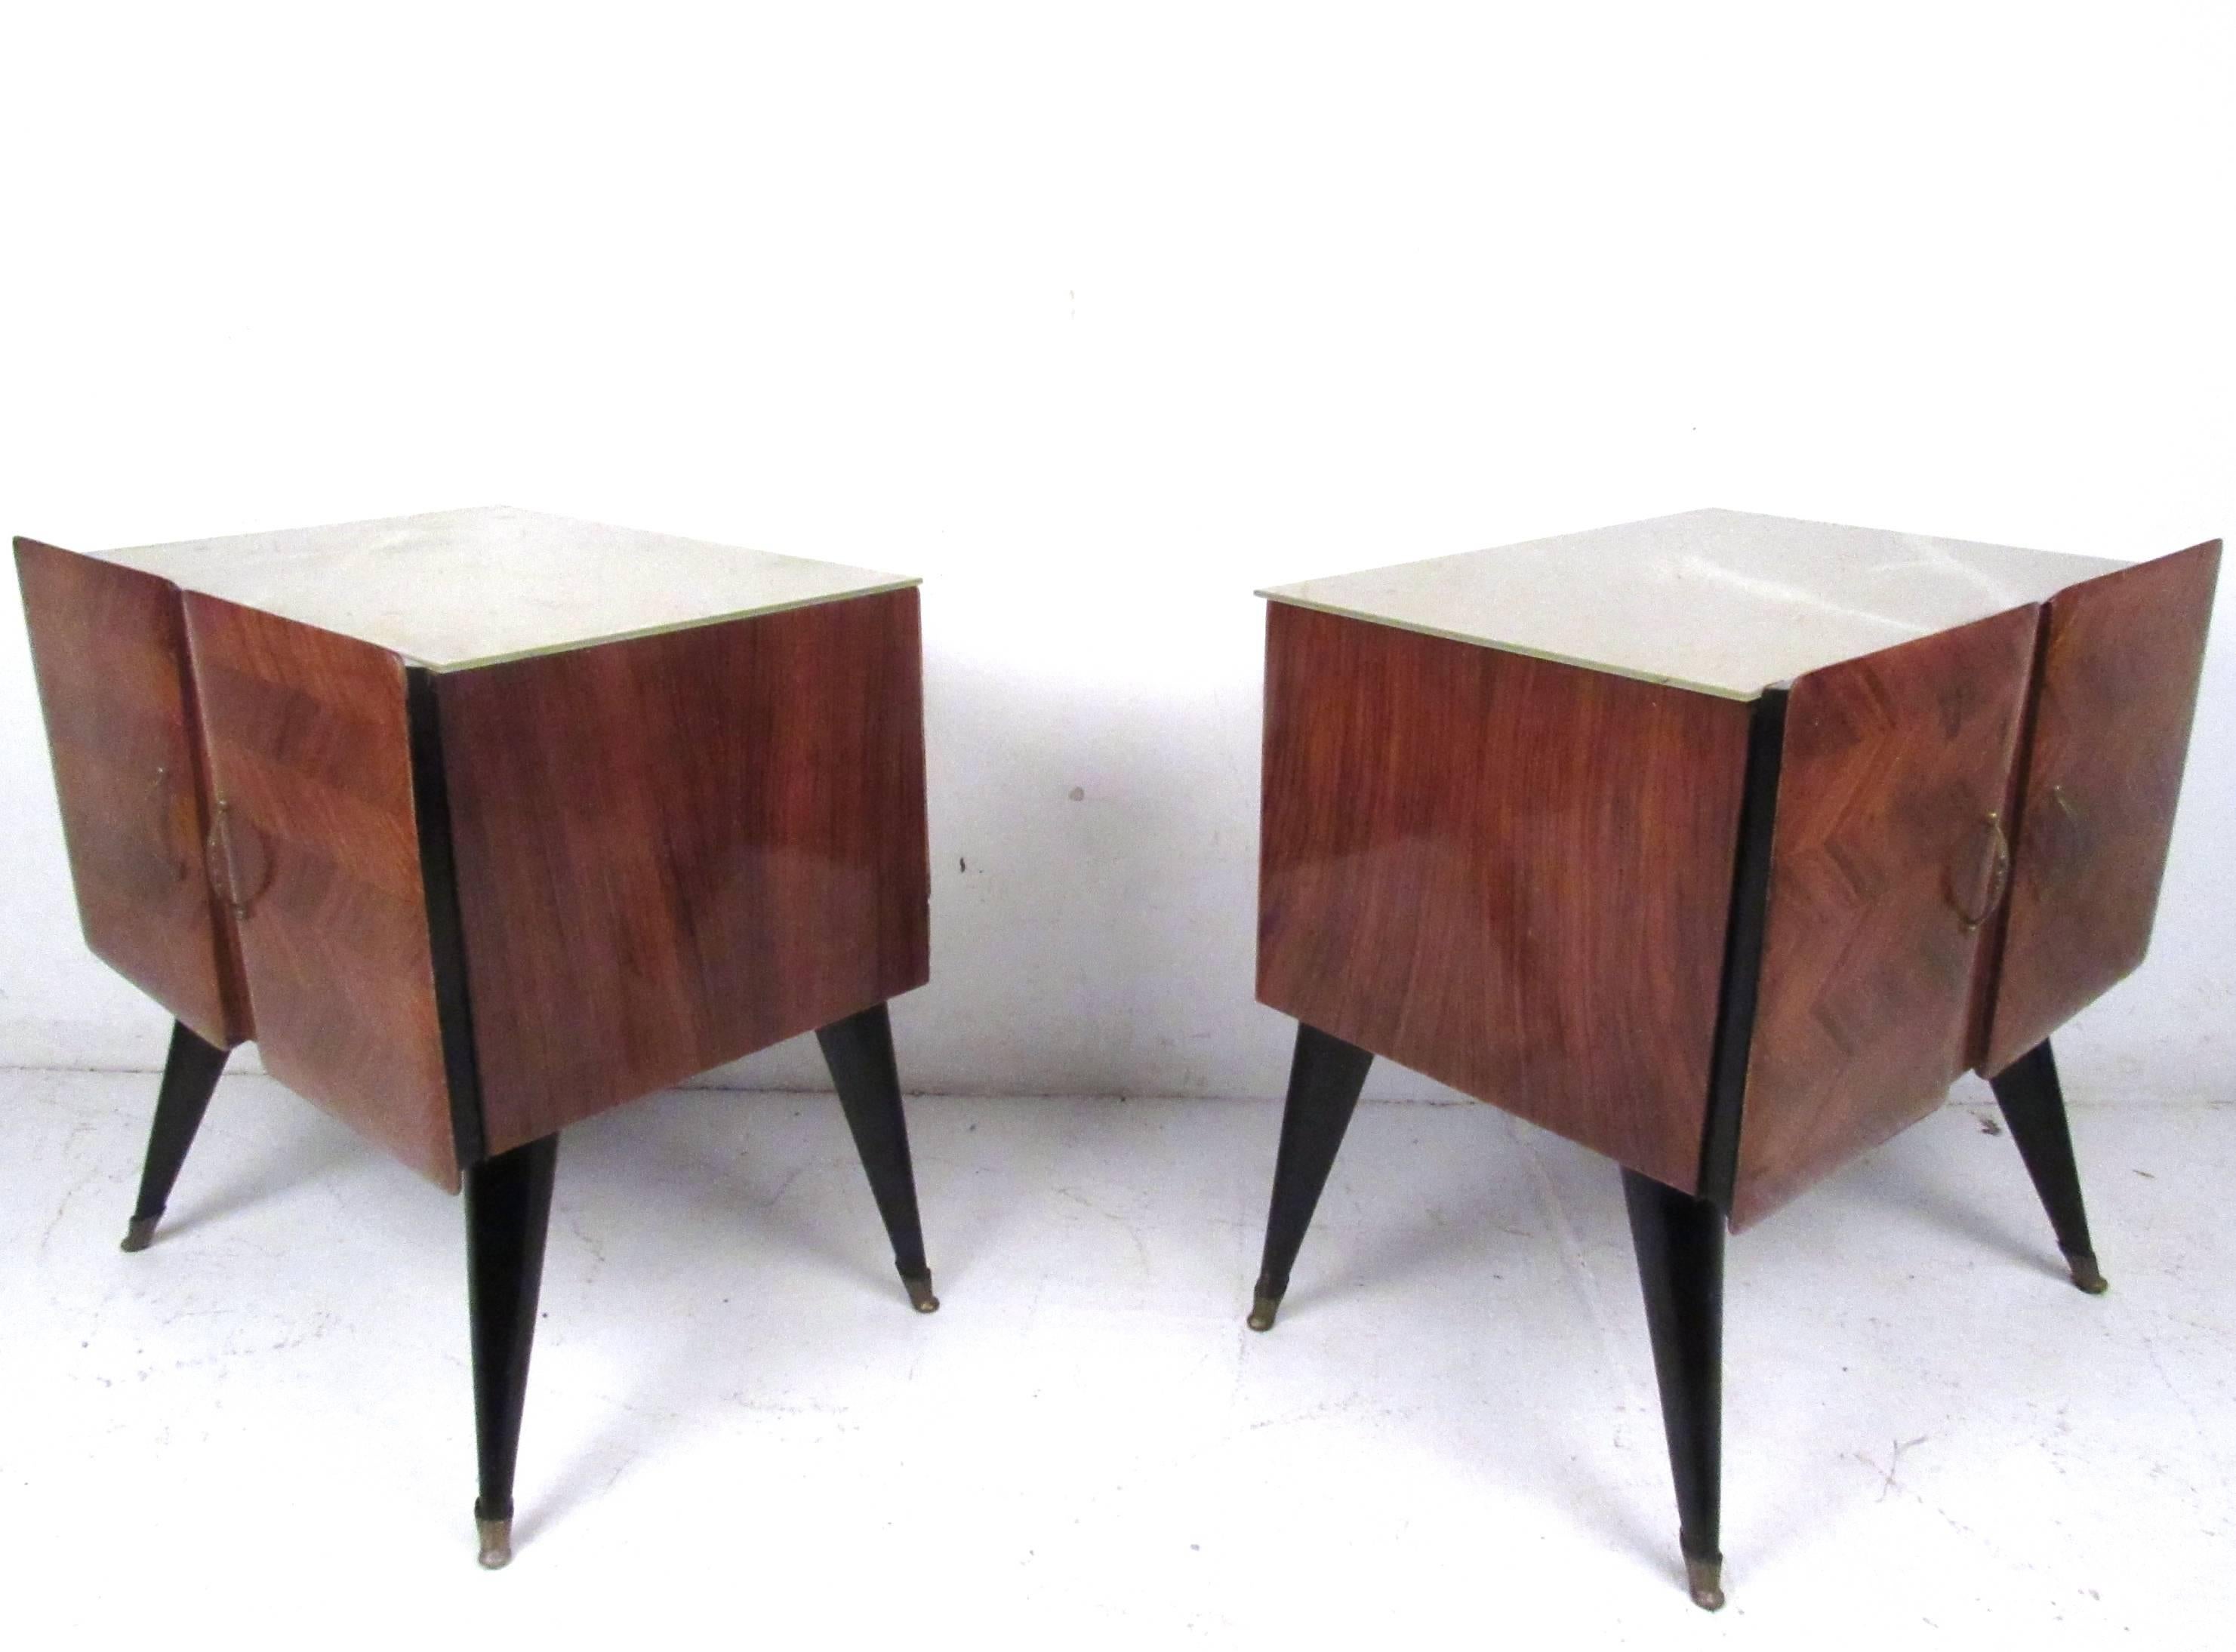 This stunning pair of Italian glass top nightstands make a beautiful addition to any room. Tapered legs, brass feet, and a beautiful vintage finish add to the charm of the pair. Unique glass tops add to it's charm, matching dresser available. Please